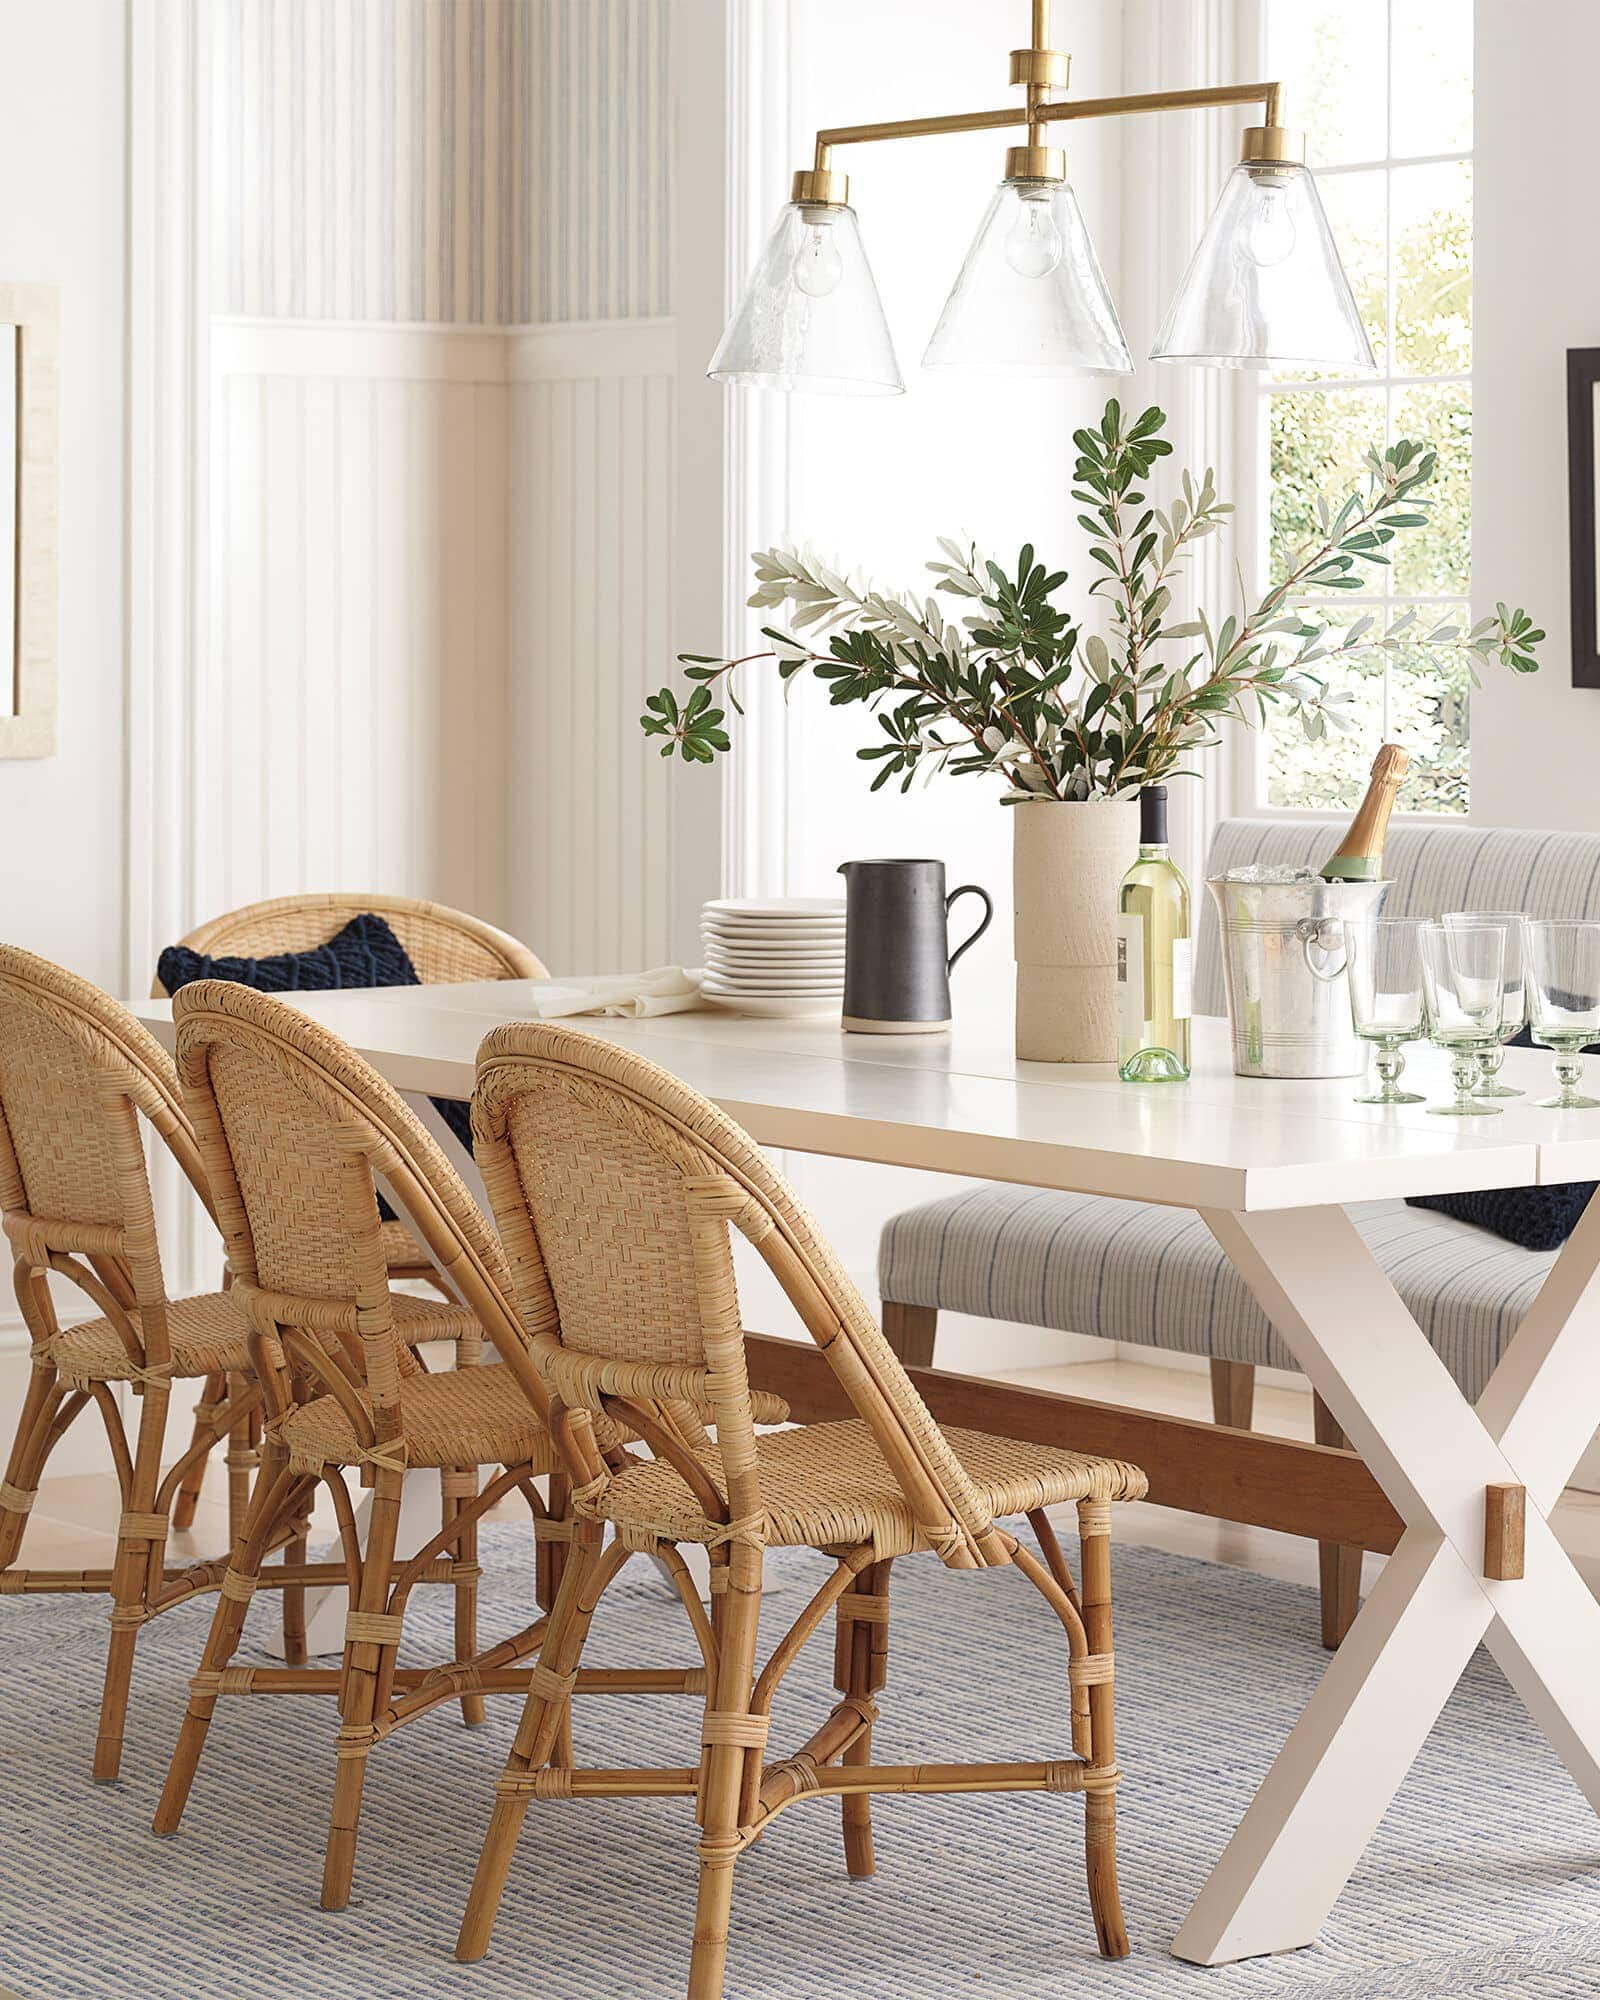 Bring in Texture with Rattan